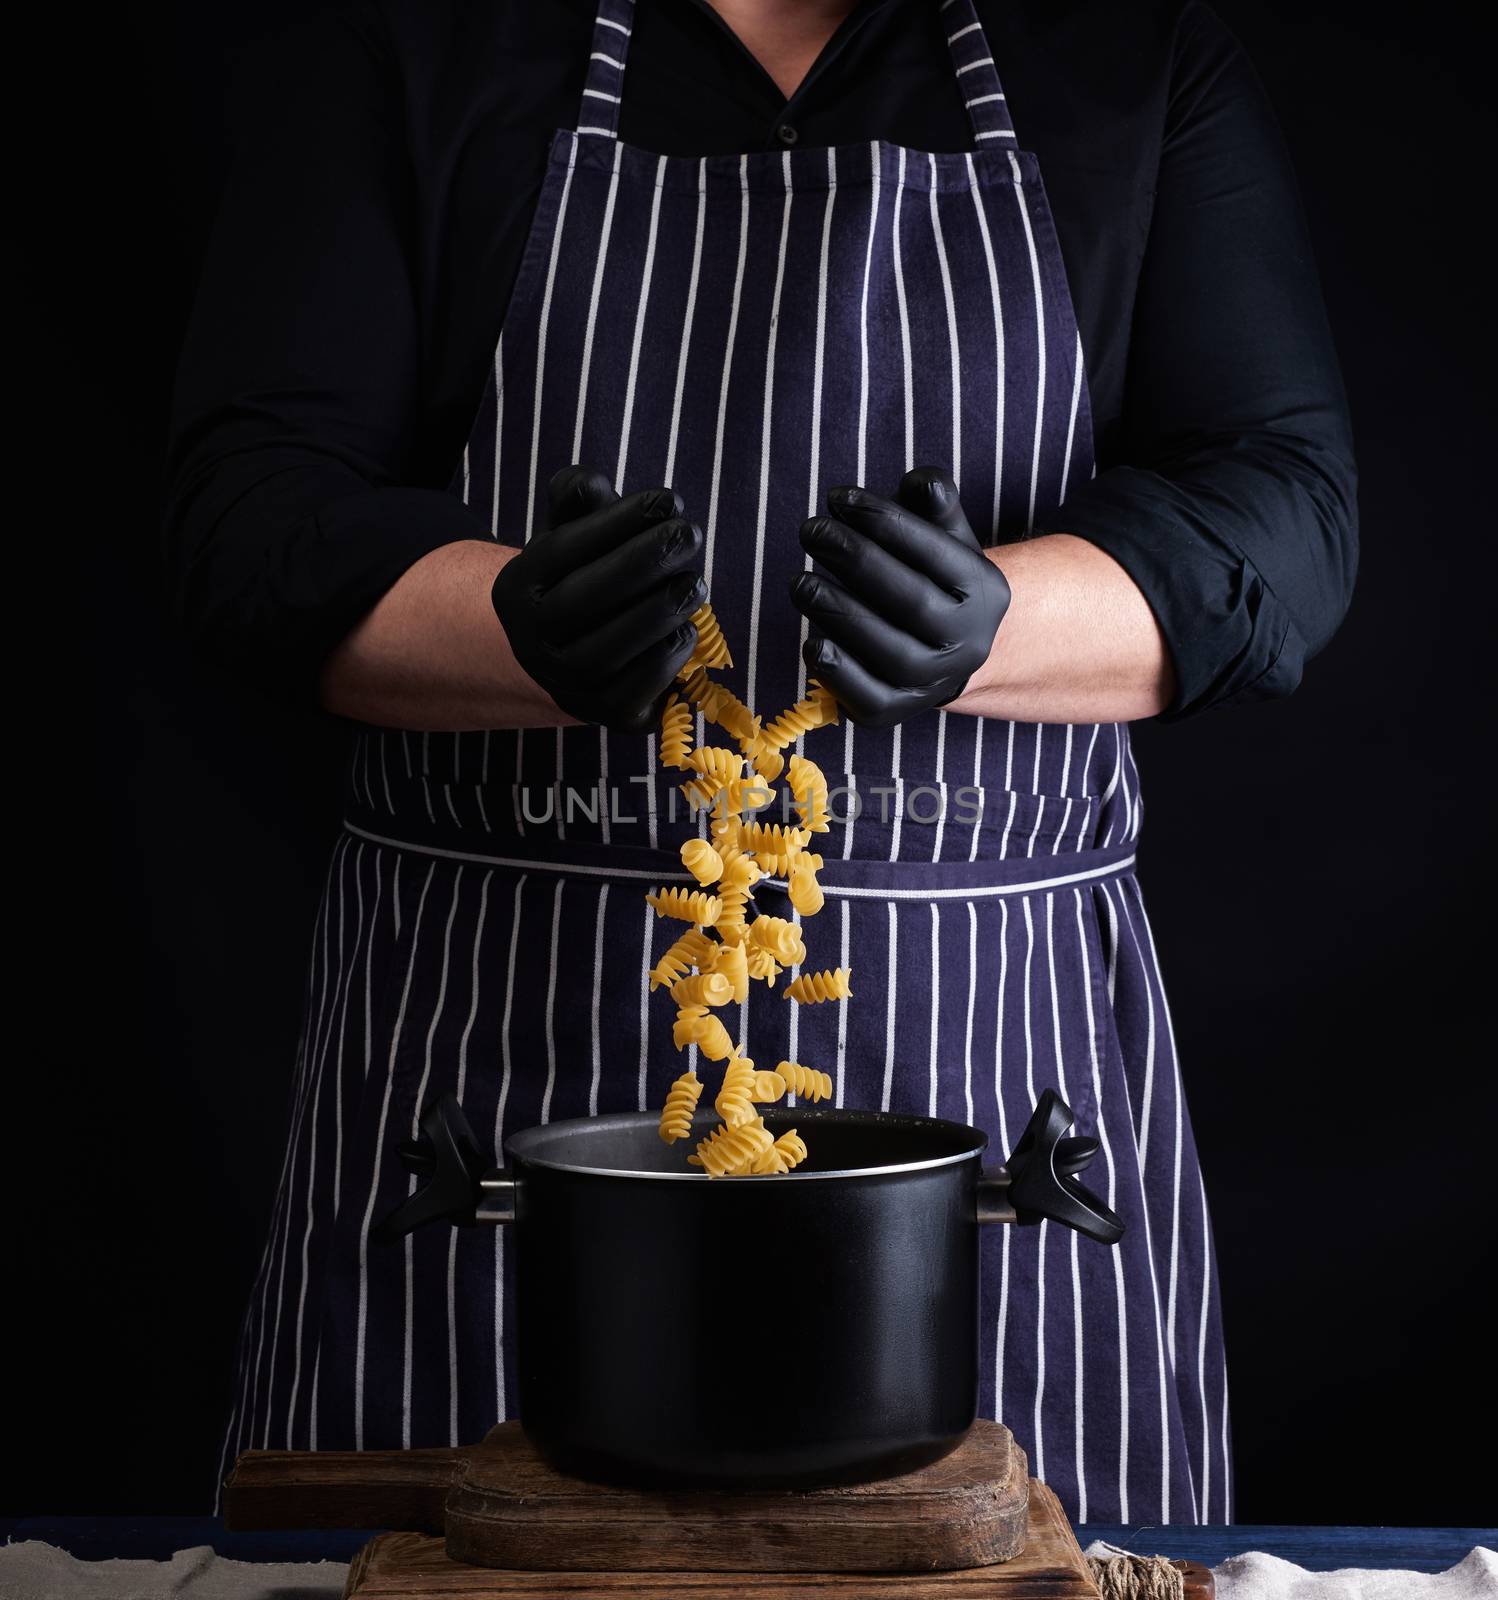 chef in black latex gloves, striped apron pours raw fusilli pasta into a metal pan, cooking process, twisted pasta frozen in the air